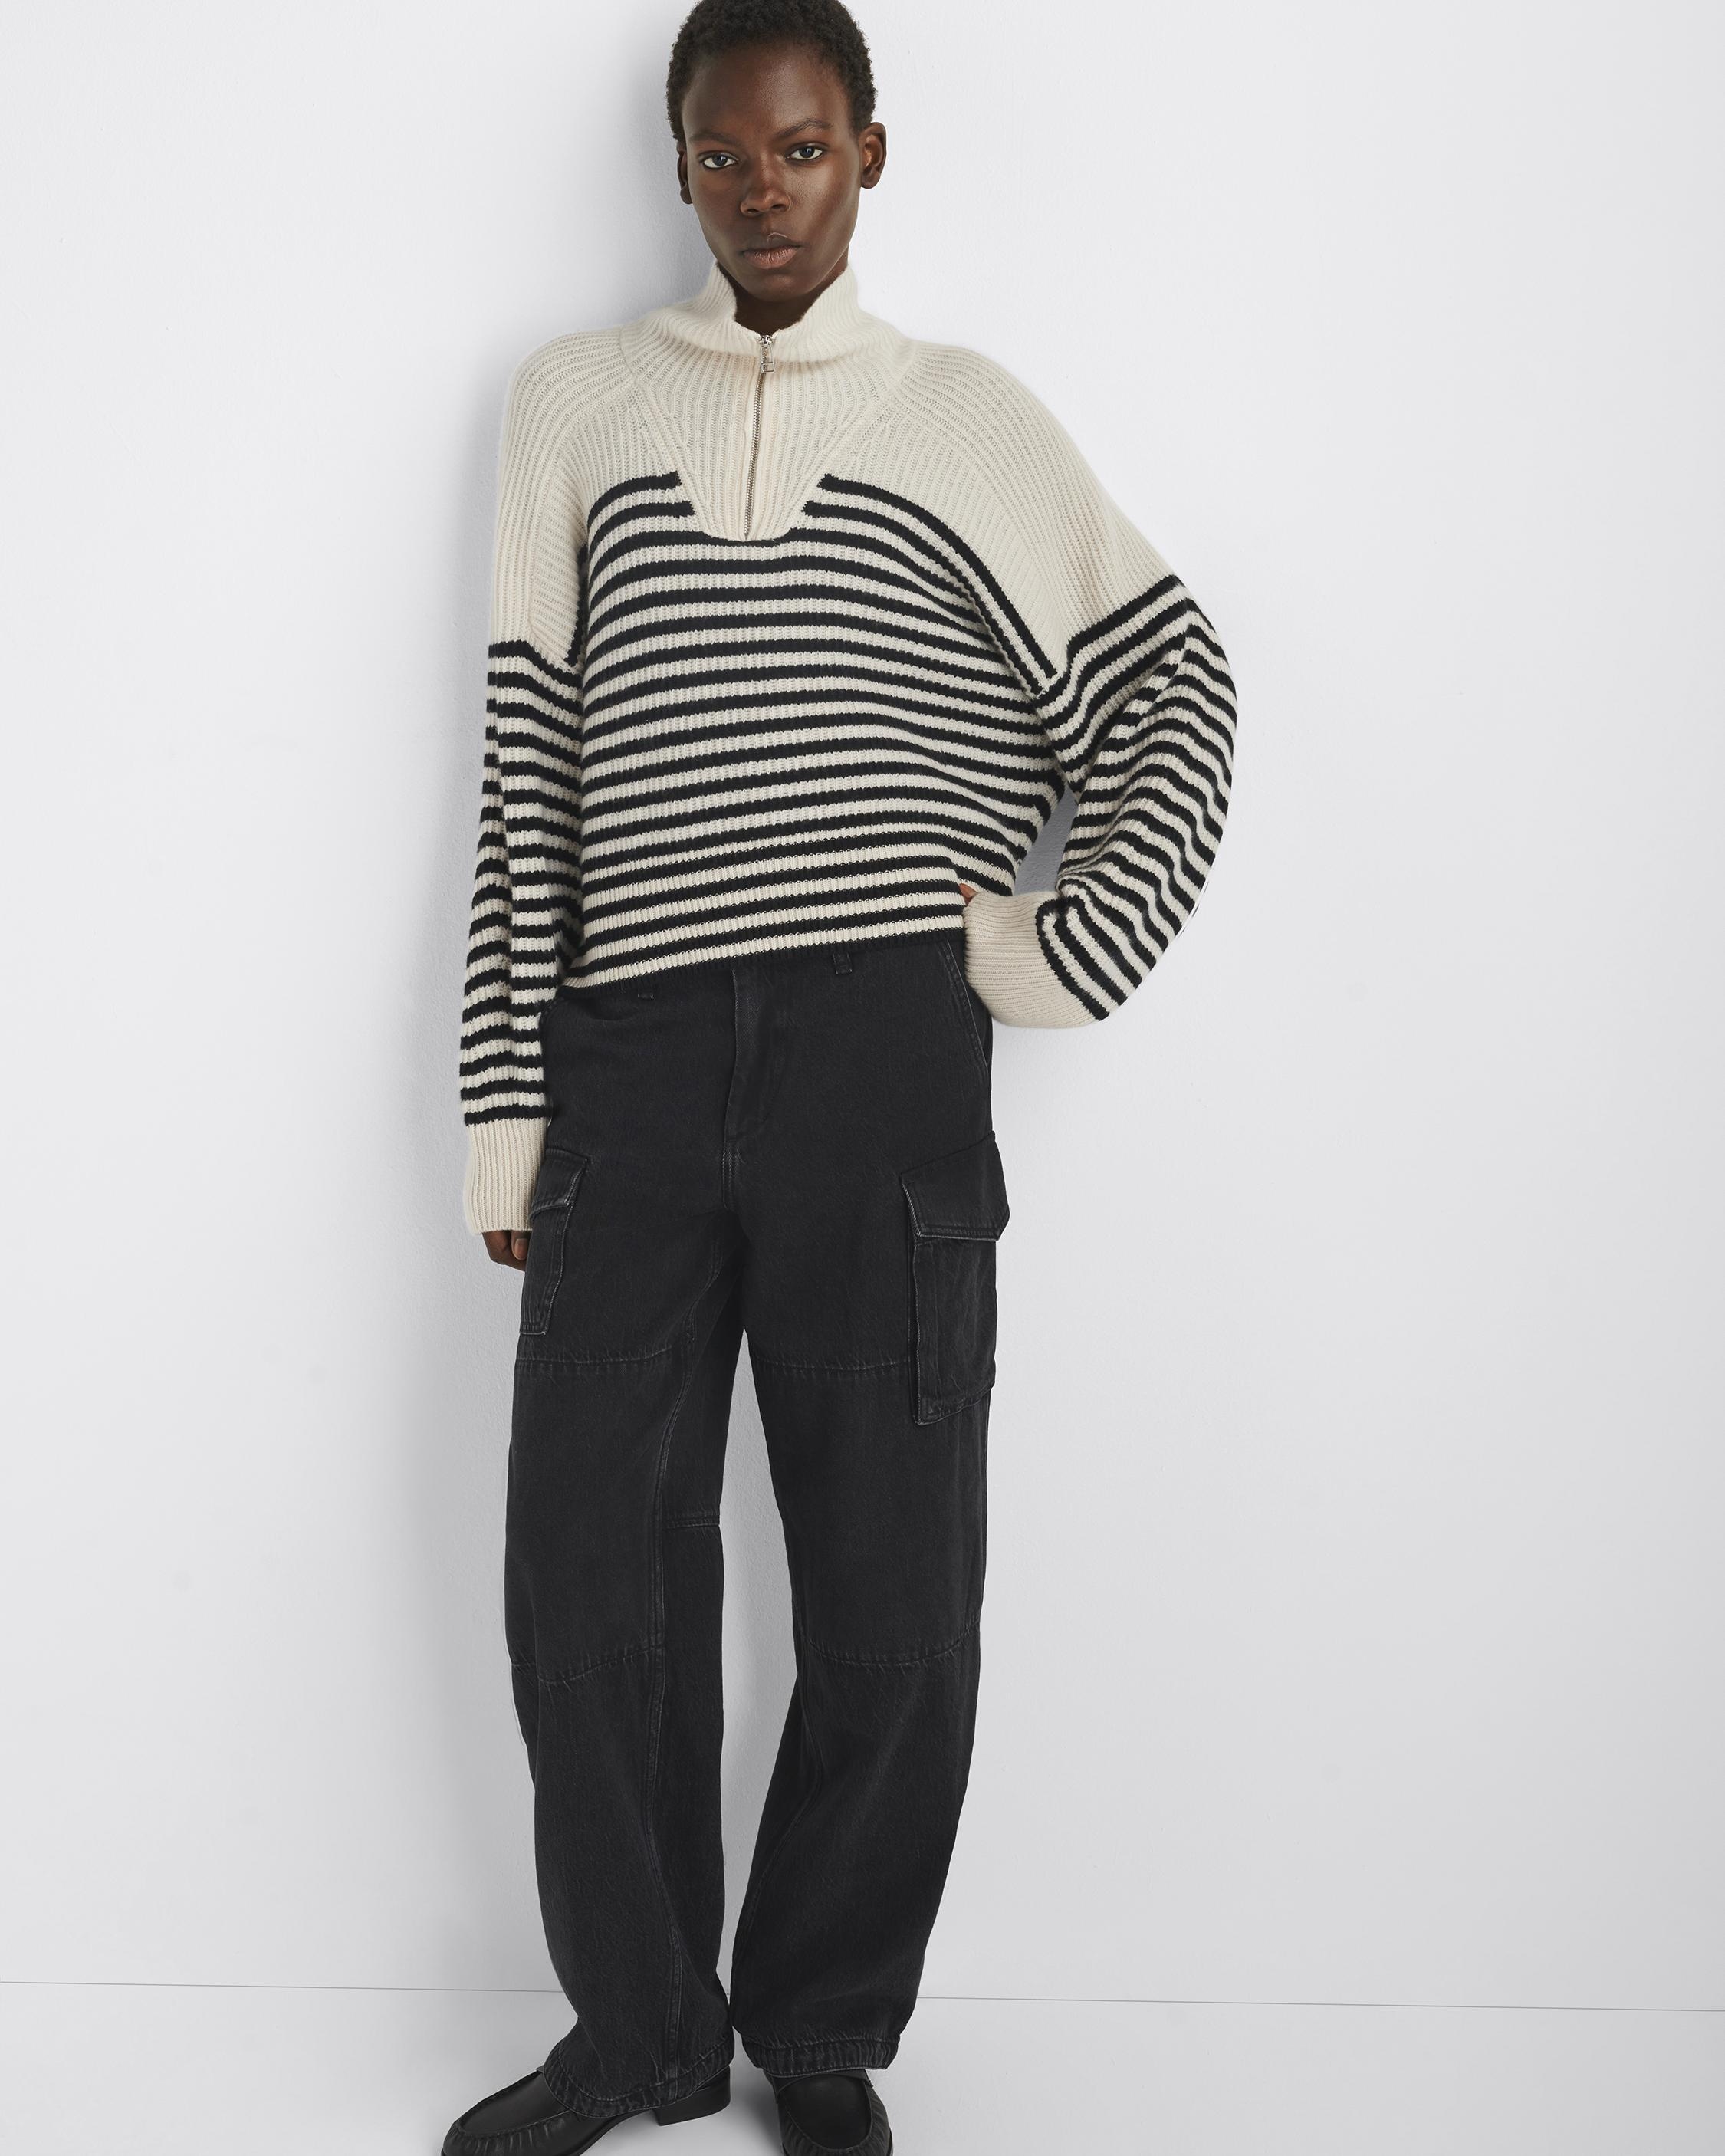 Pierce Striped Cashmere Half-Zip
Relaxed Fit - 2